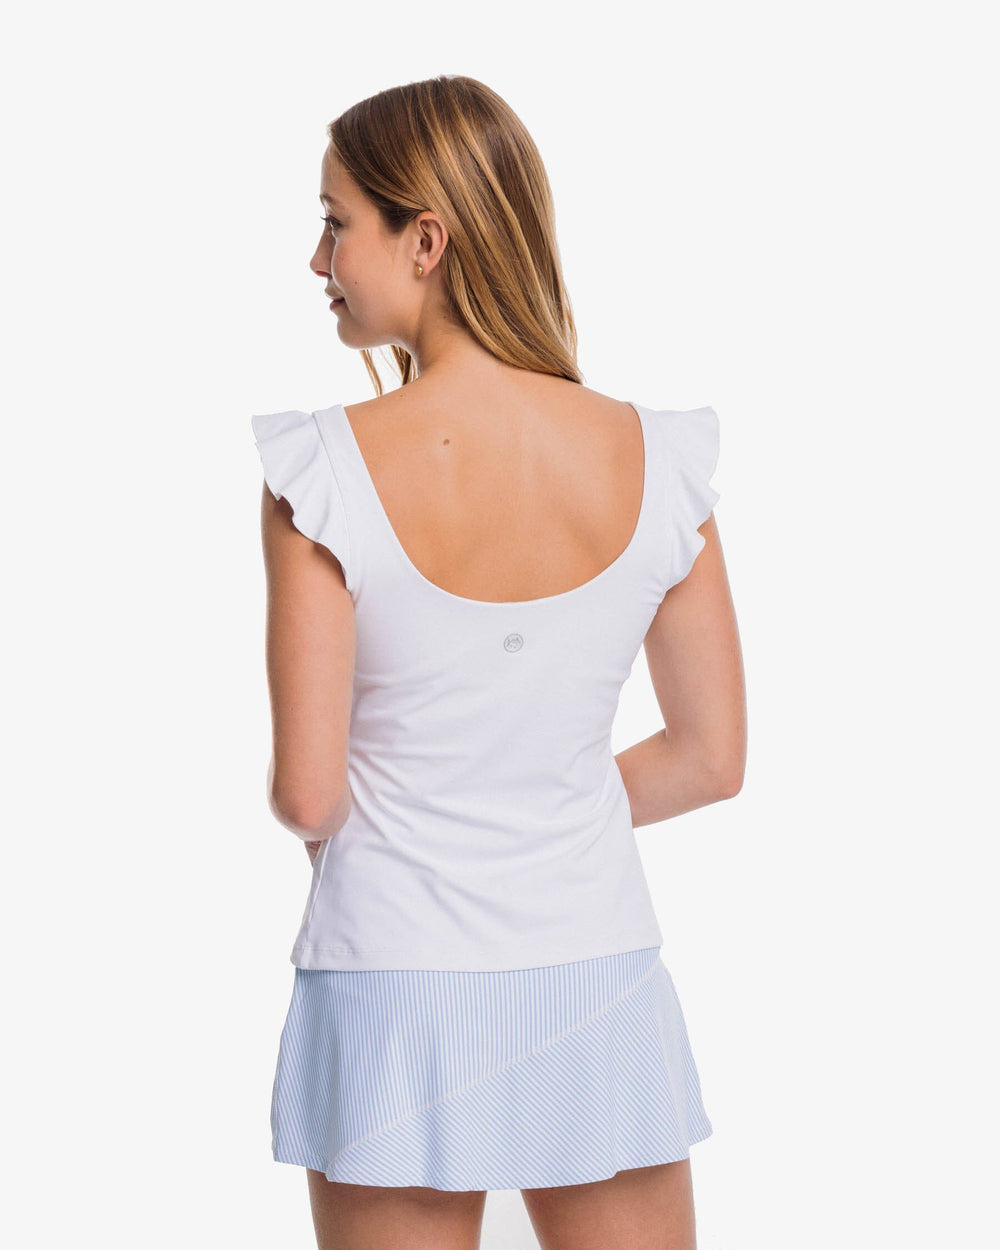 The back view of the Southern Tide Lisi Active Ruffle Tank by Southern Tide - Classic White